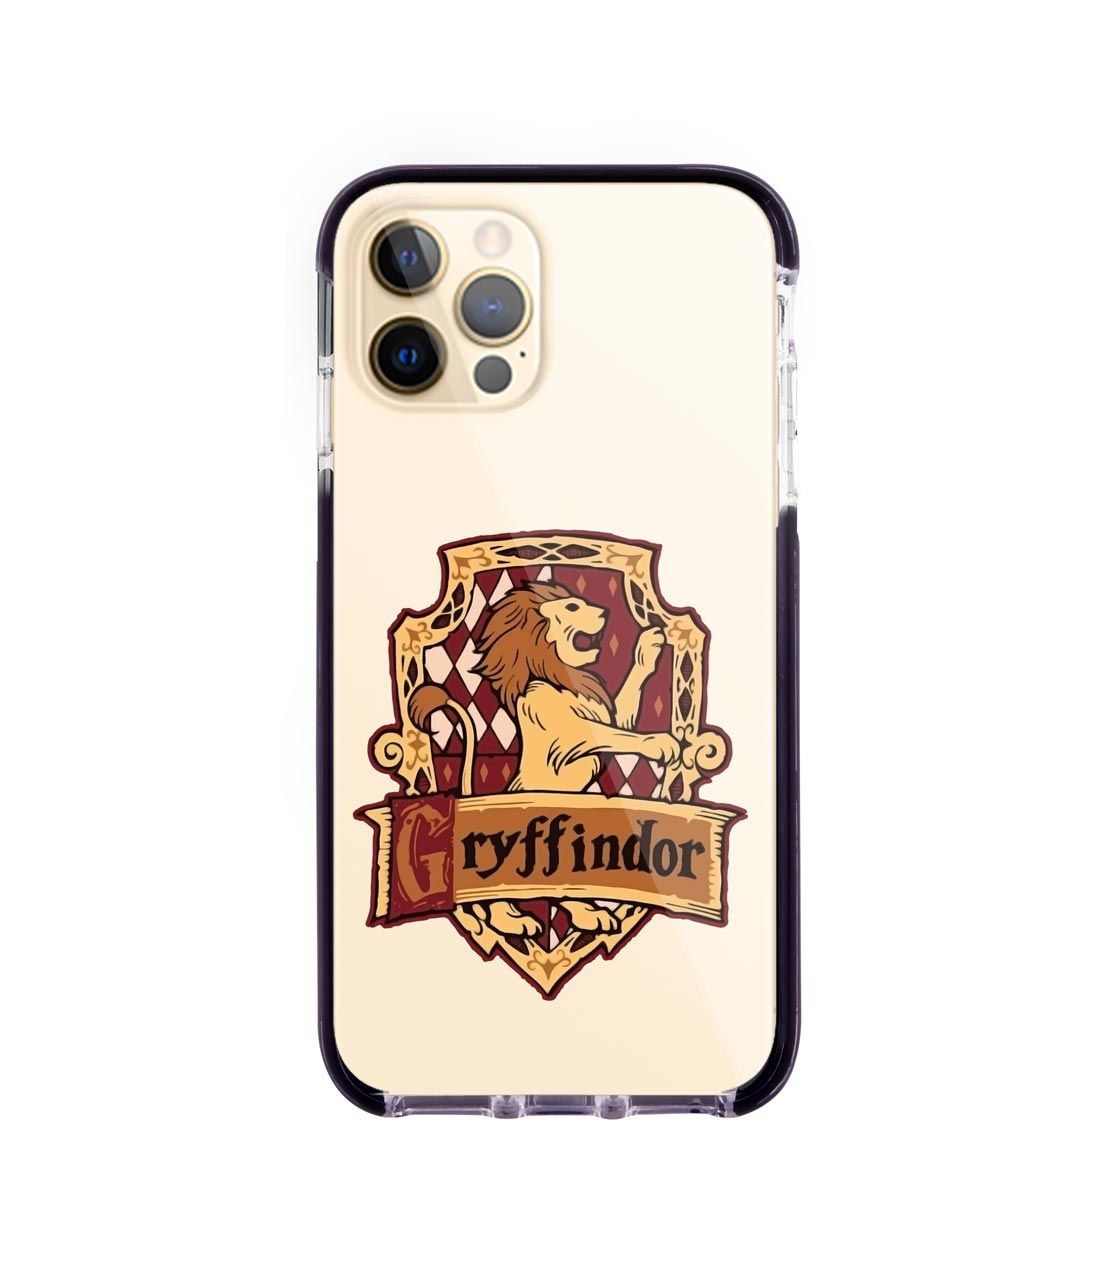 Crest Gryffindor - Extreme Case for iPhone 12 Pro Max